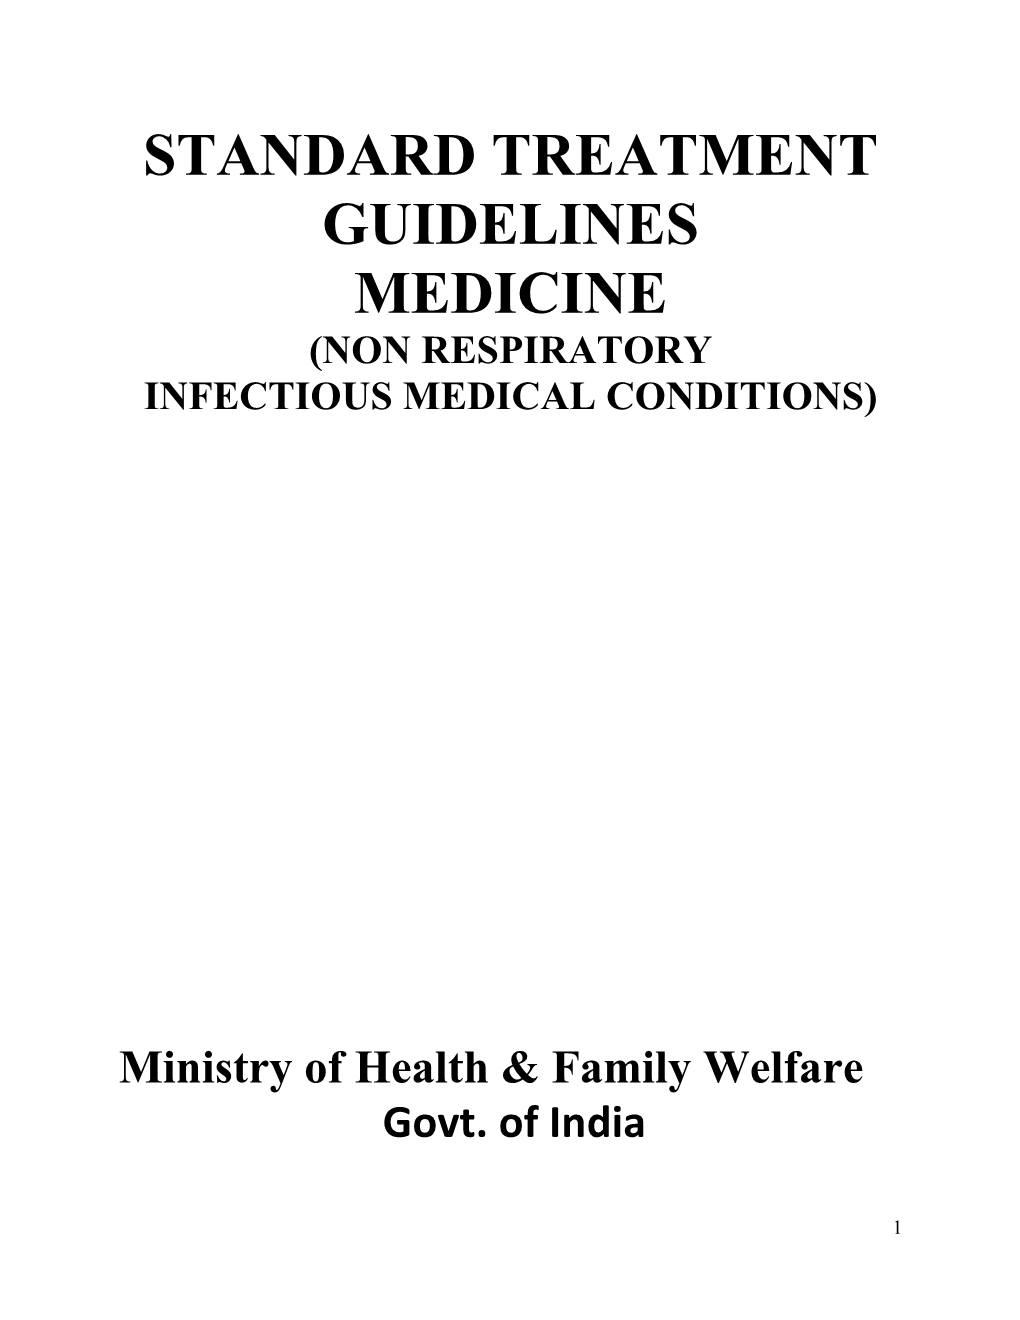 Standard Treatment Guidelines Medicine (Non Respiratory Infectious Medical Conditions)